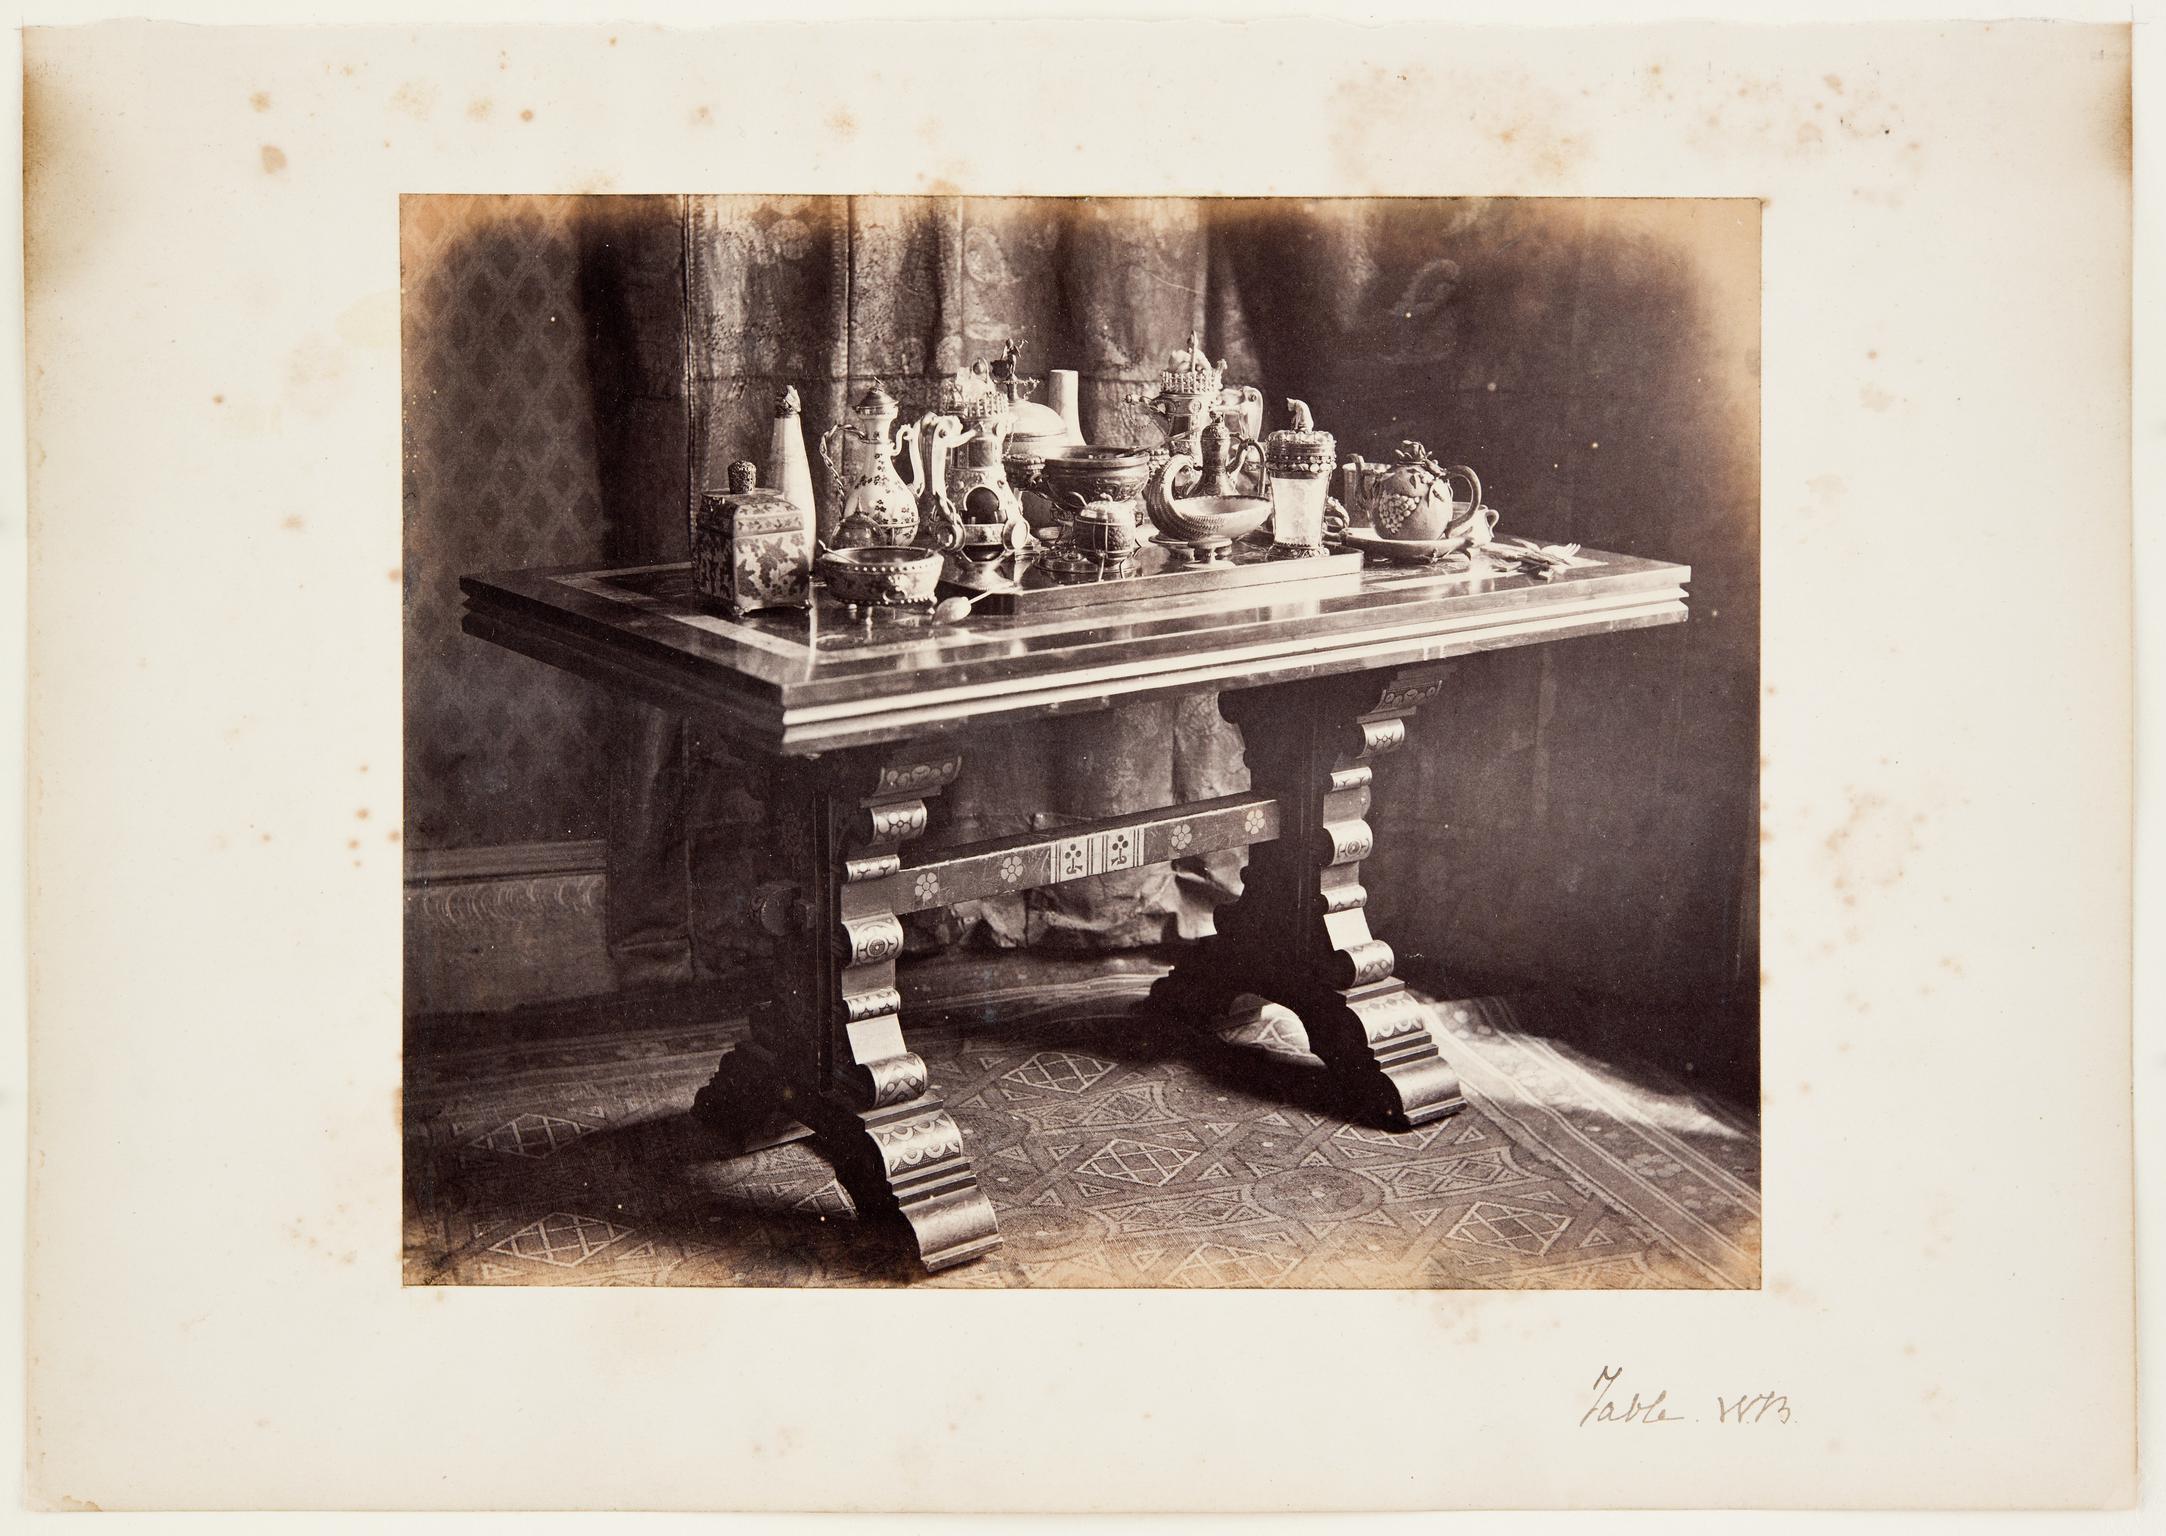 A Table with a Collection of Burges's Metalwork